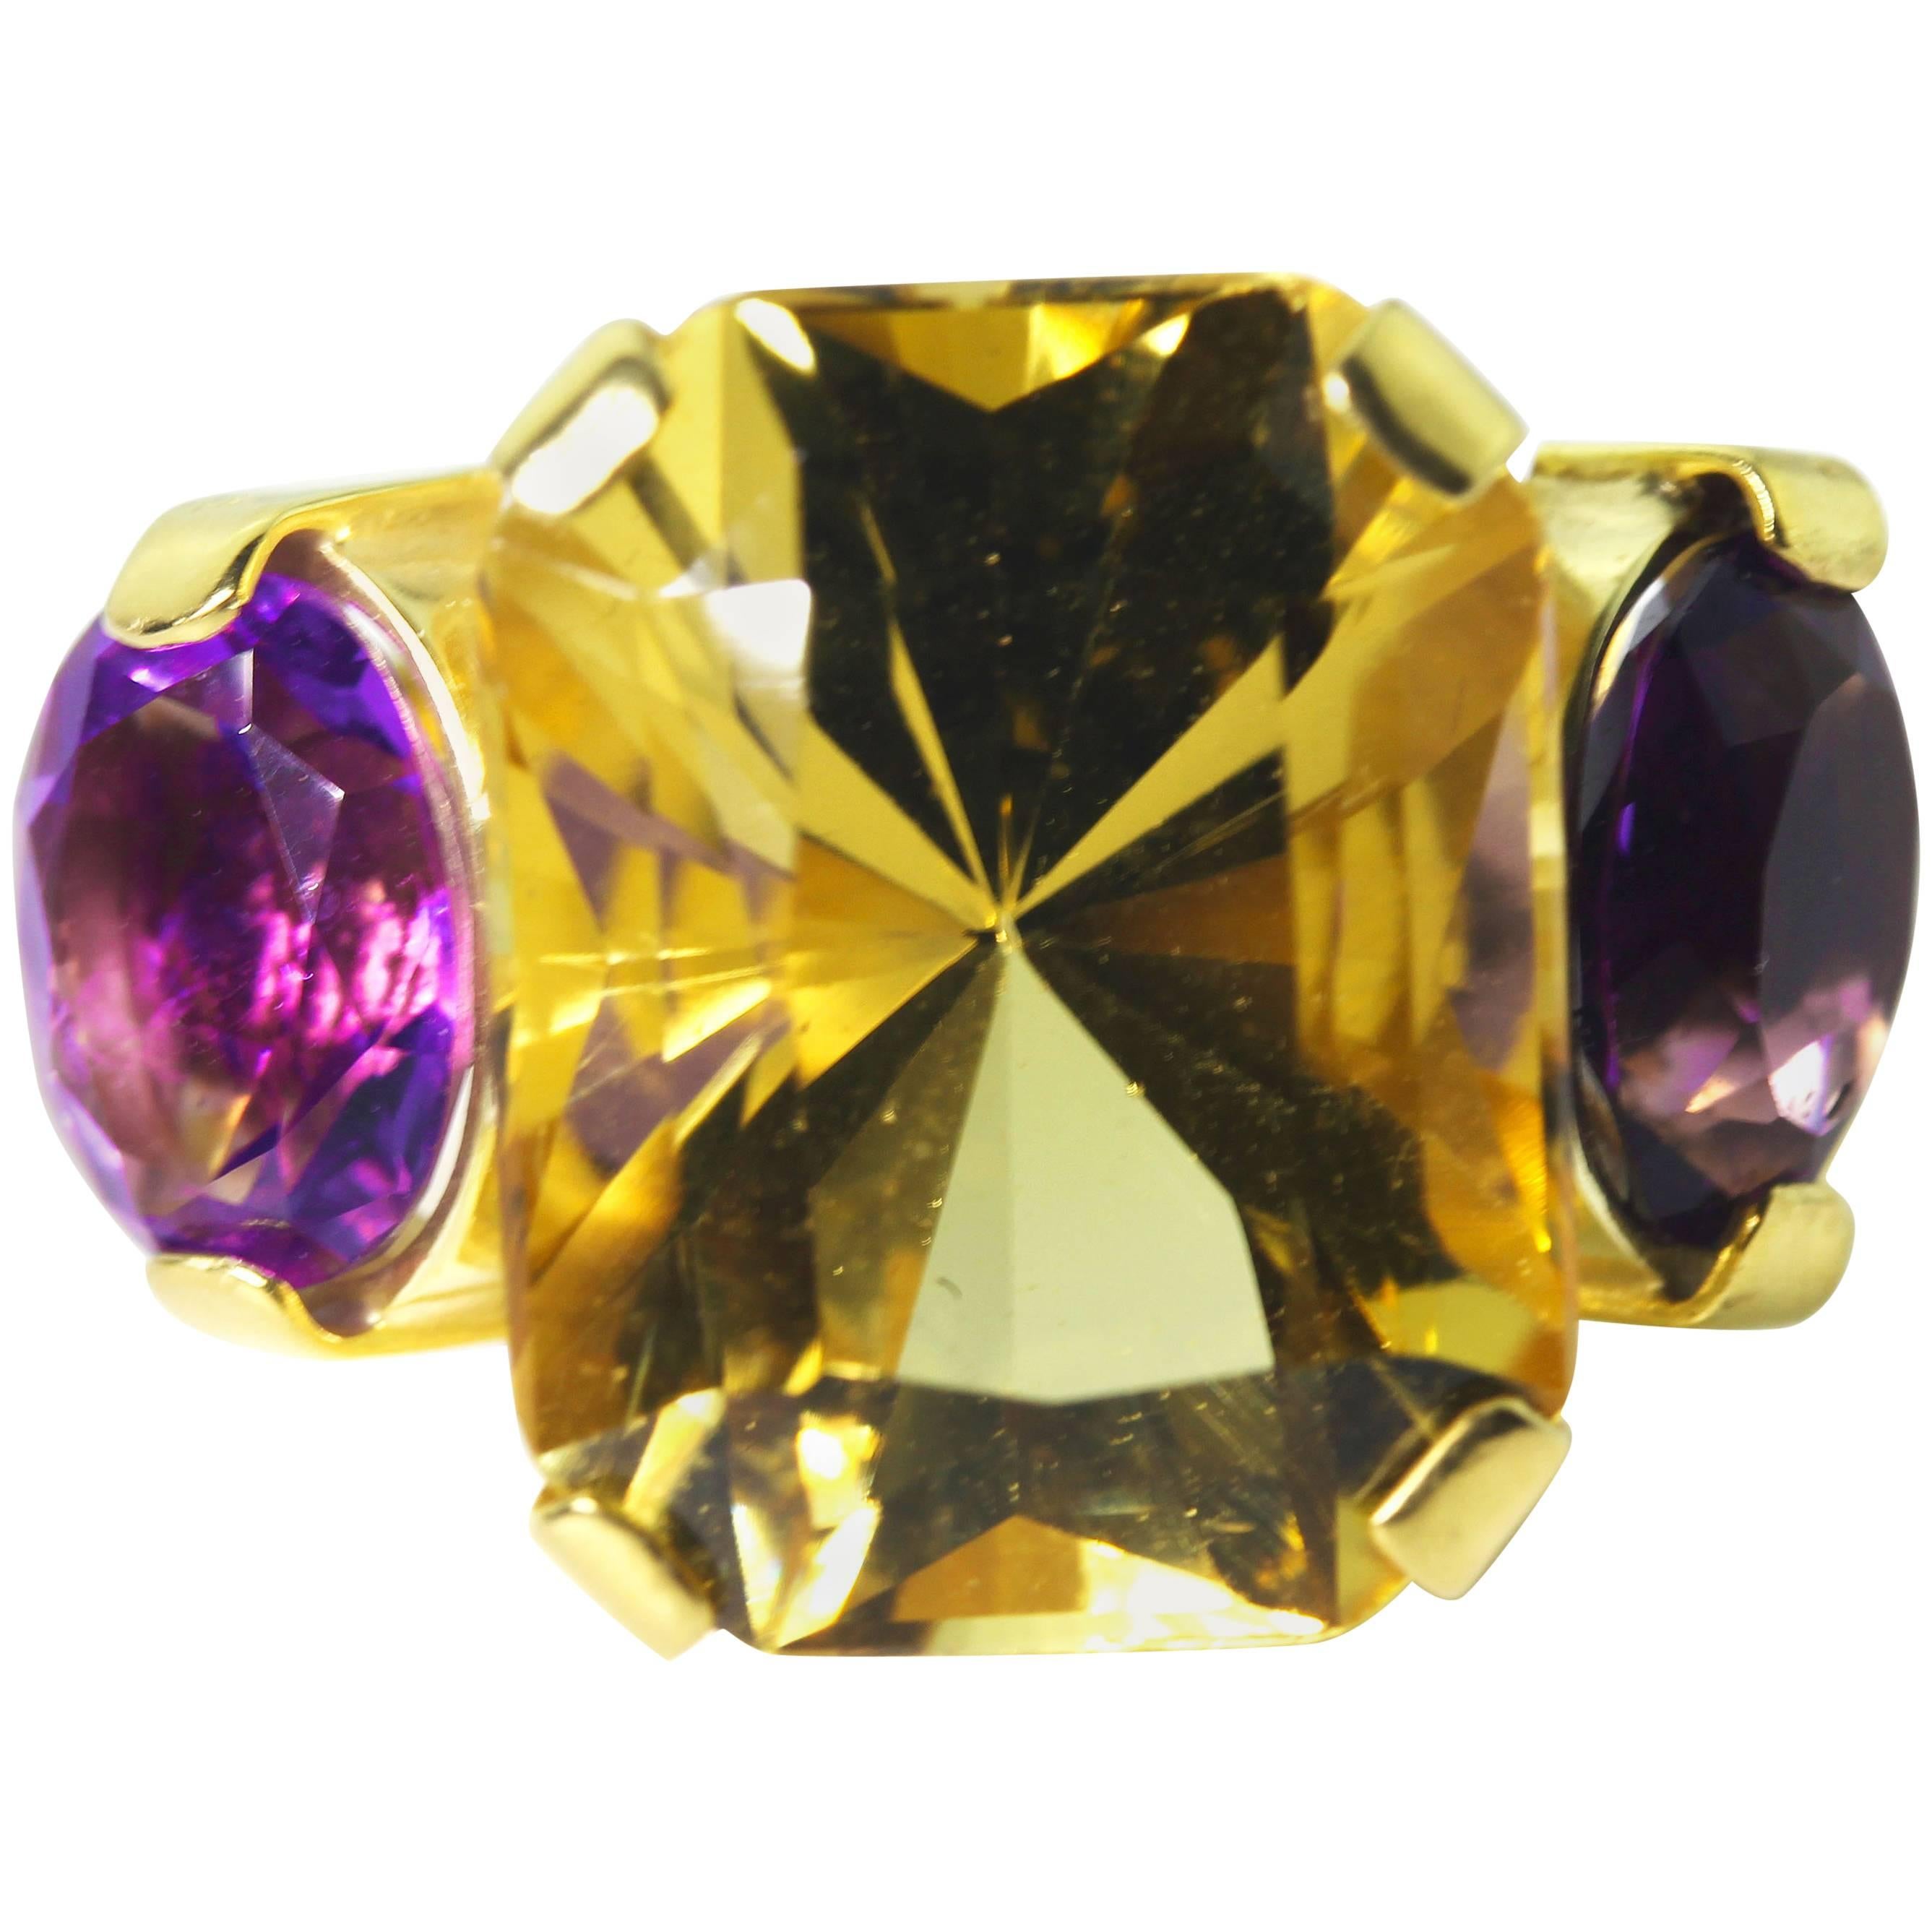 13.5 Carat Brilliant Yellow Heliodor Amethyst 18 kt Gold Cocktail Ring